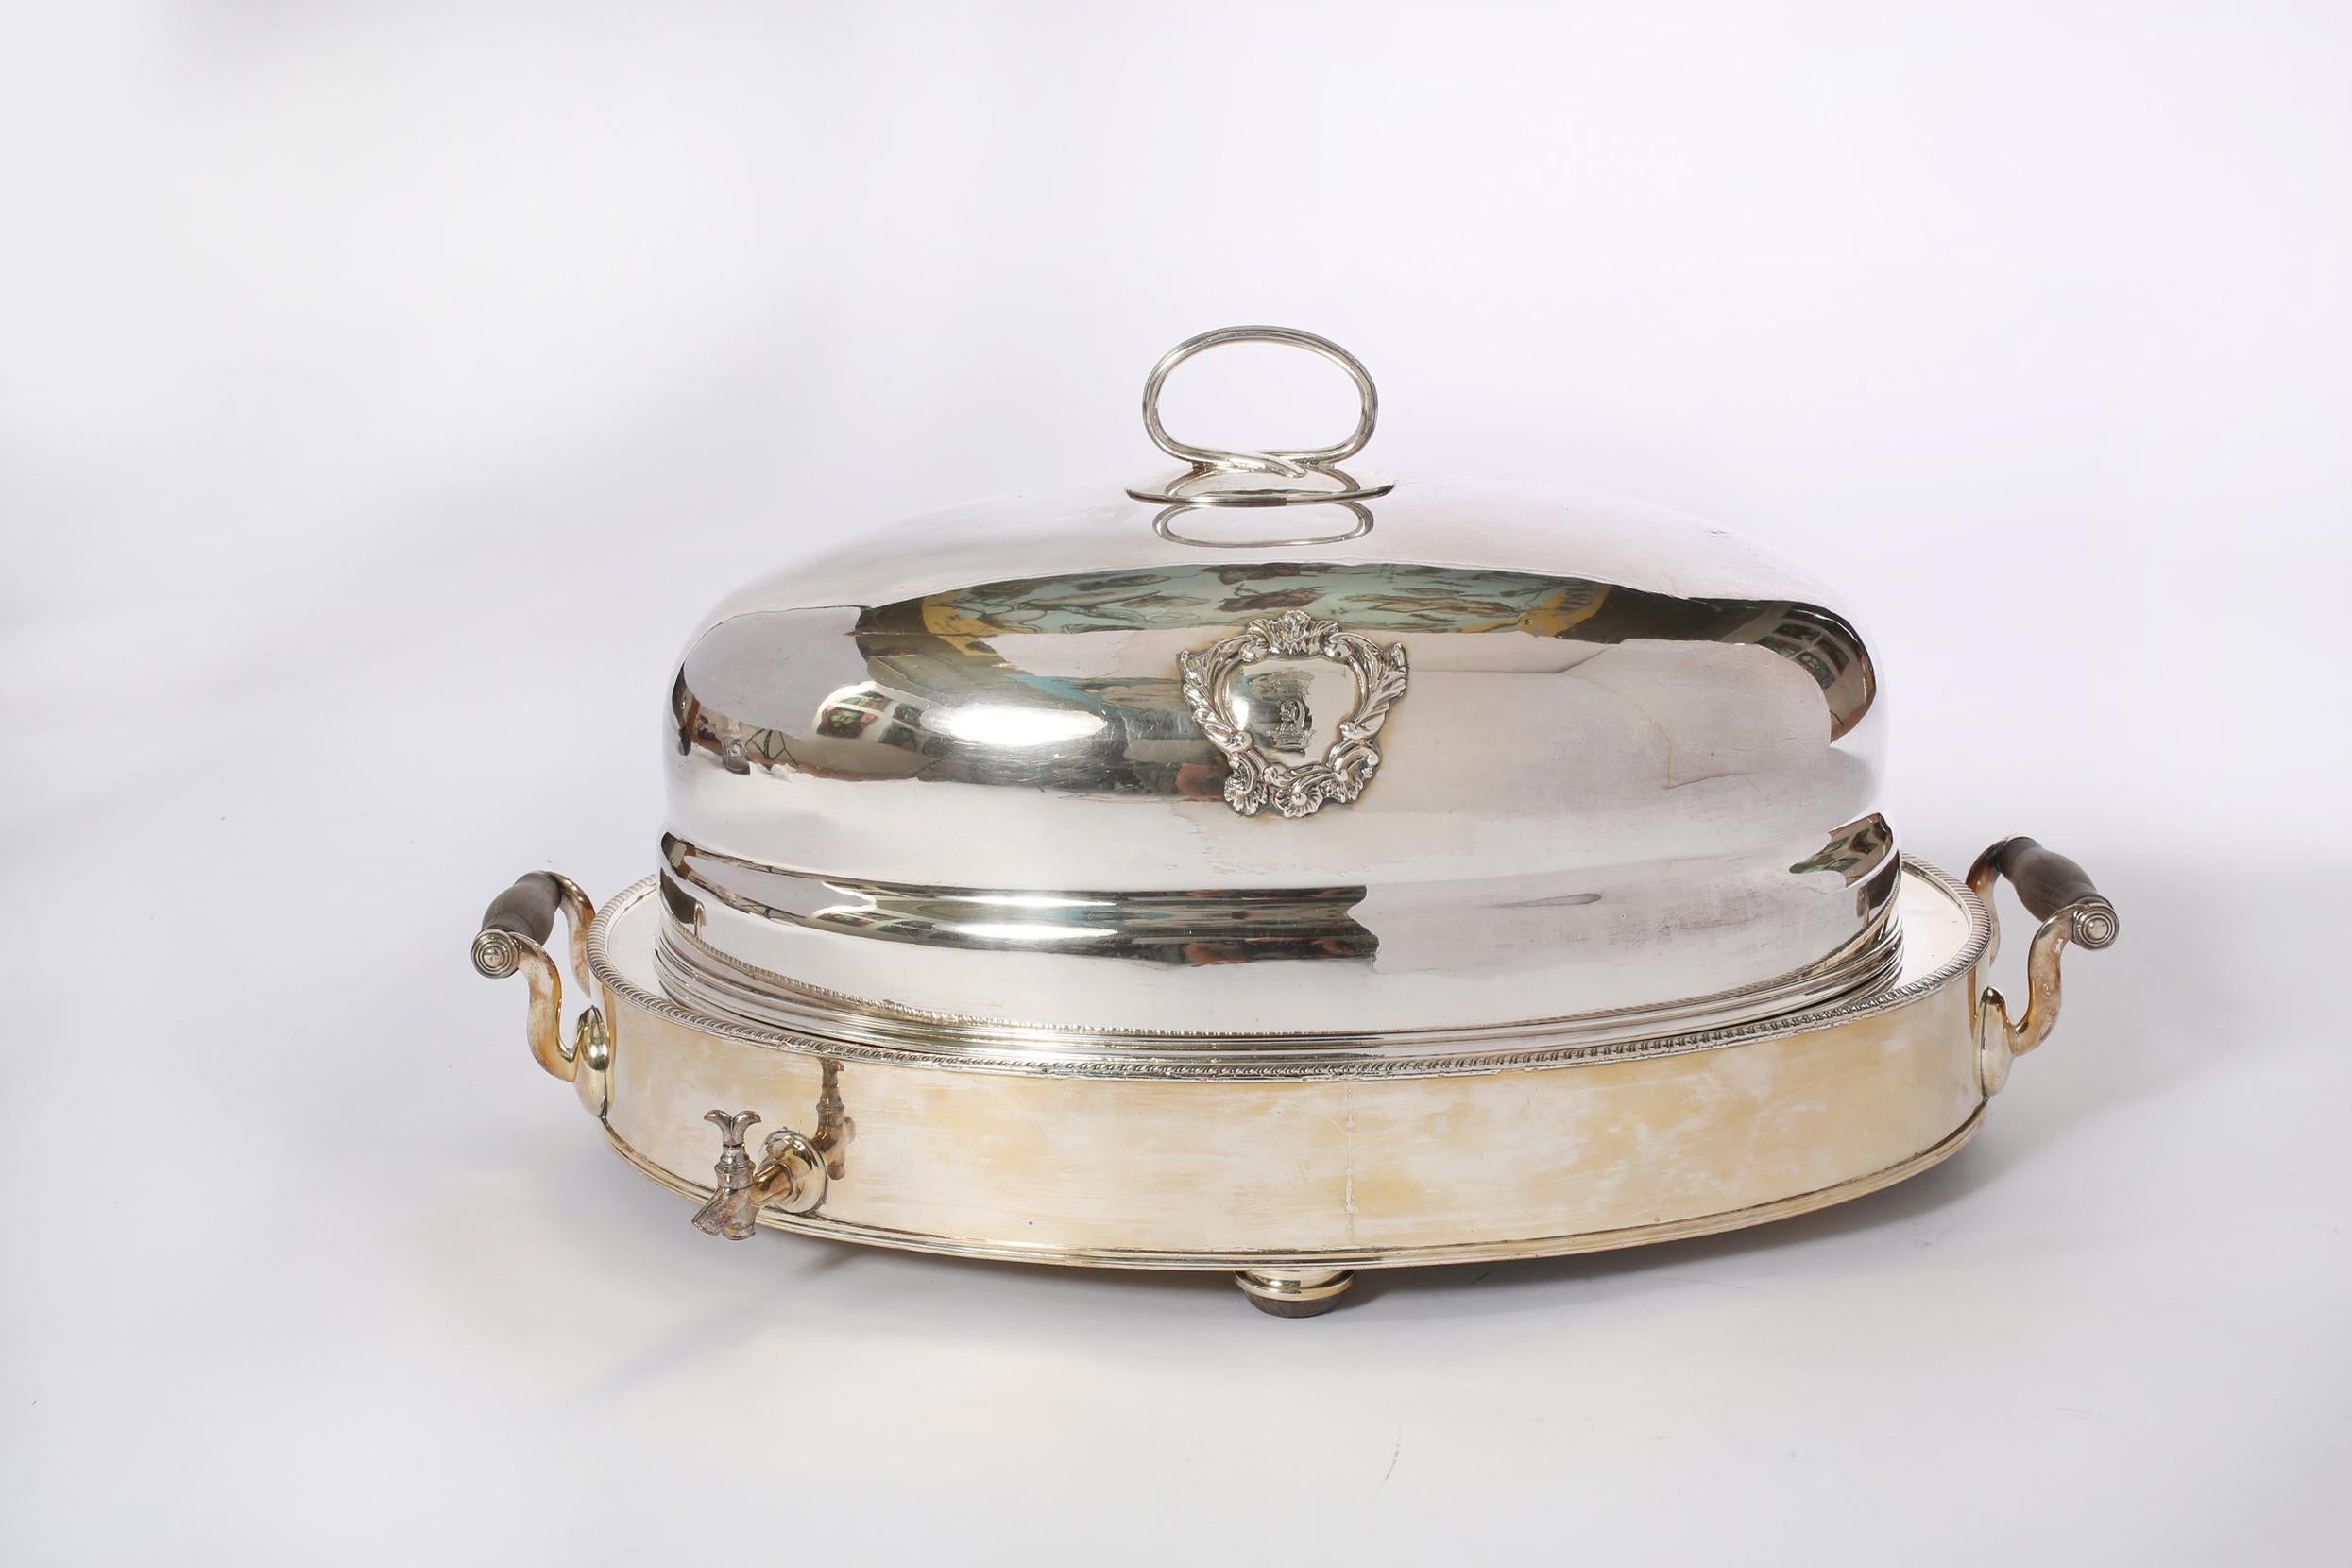 Impressive English Sheffield silver plated tableware meat dome service set with wooden side handles. The piece is in good vintage condition with wear appropriate to age / use. Maker's mark undersigned. The dome measures about 23 inches long x 14.5